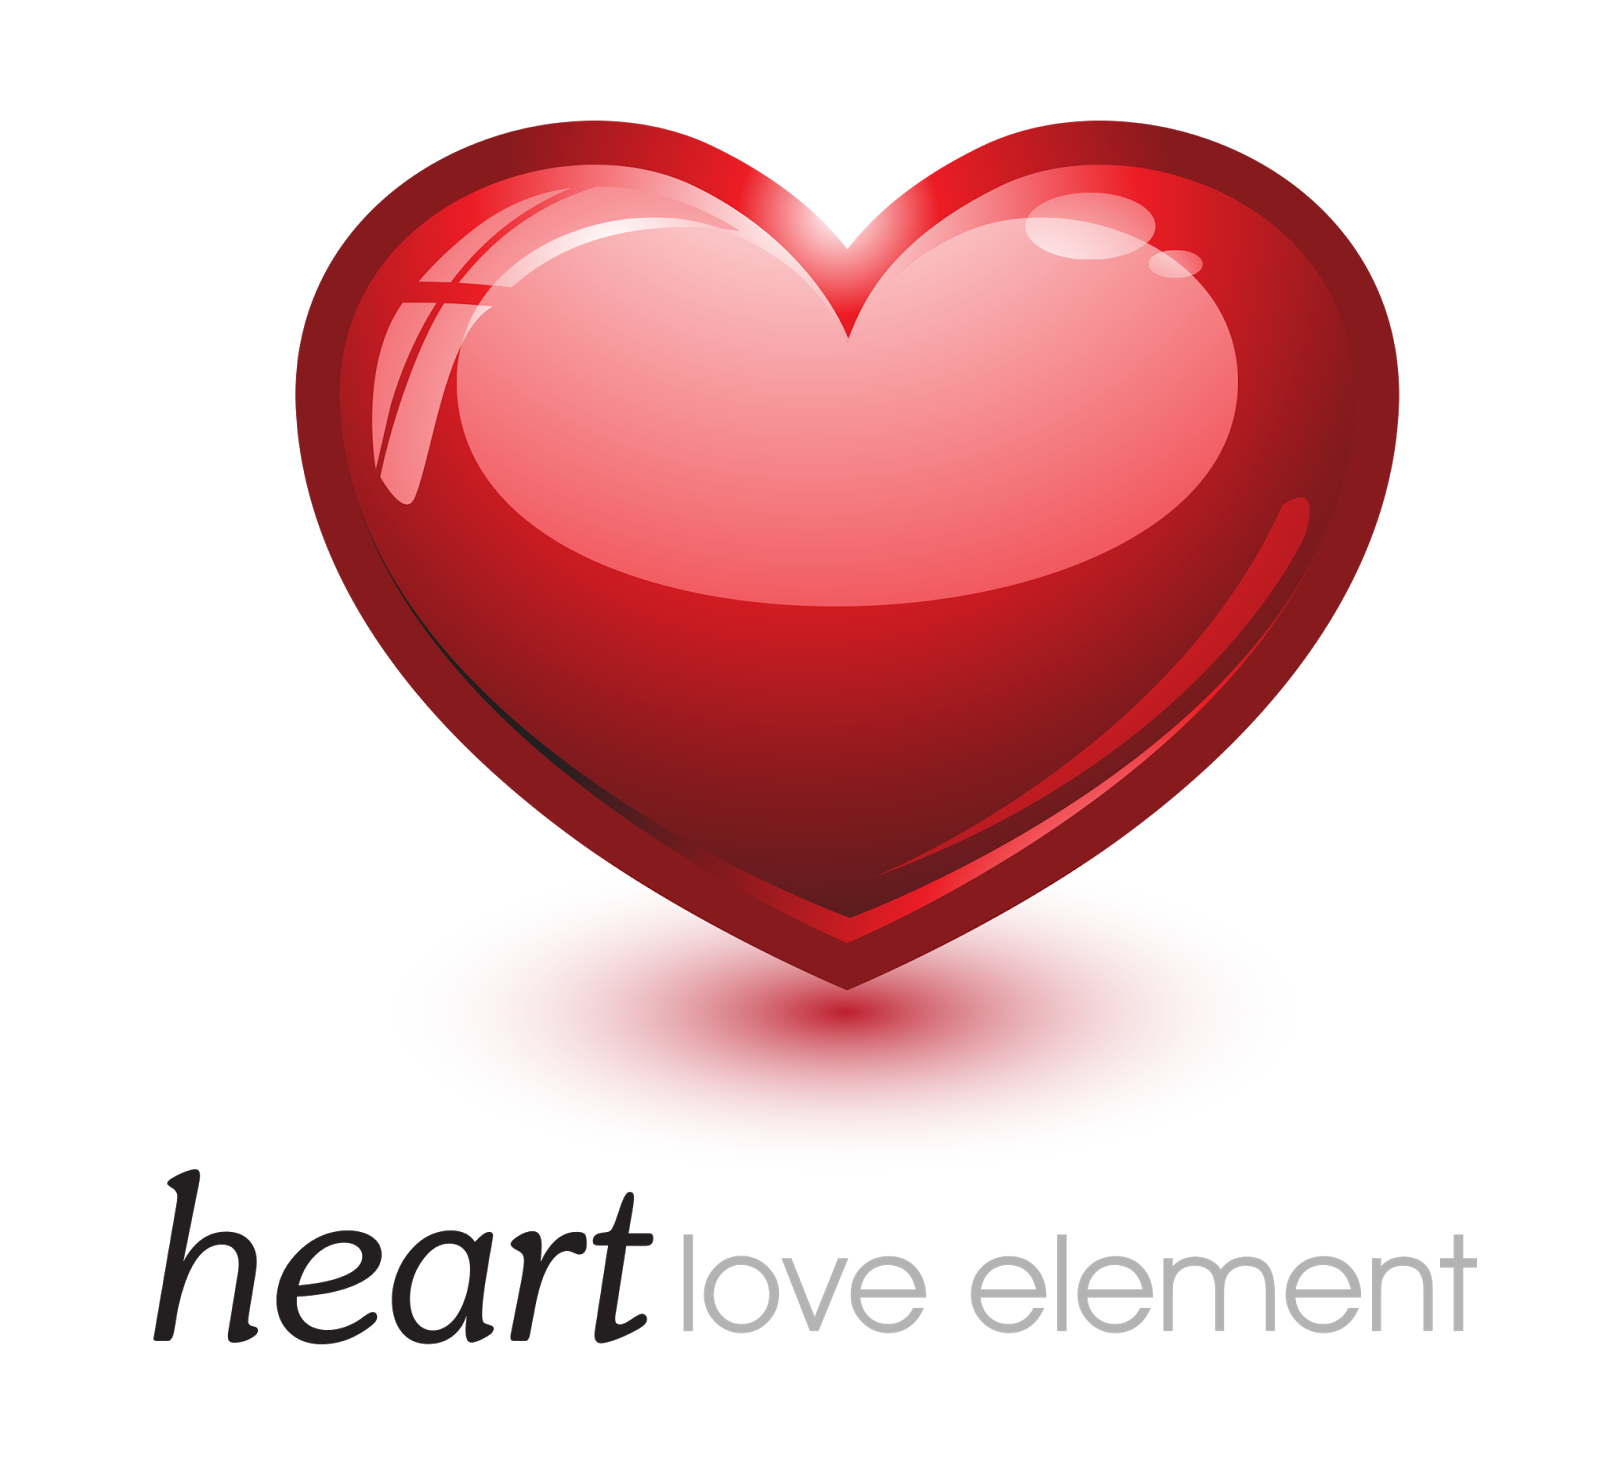 Red Heart Love Element - Vector | Icon | Wallpaper